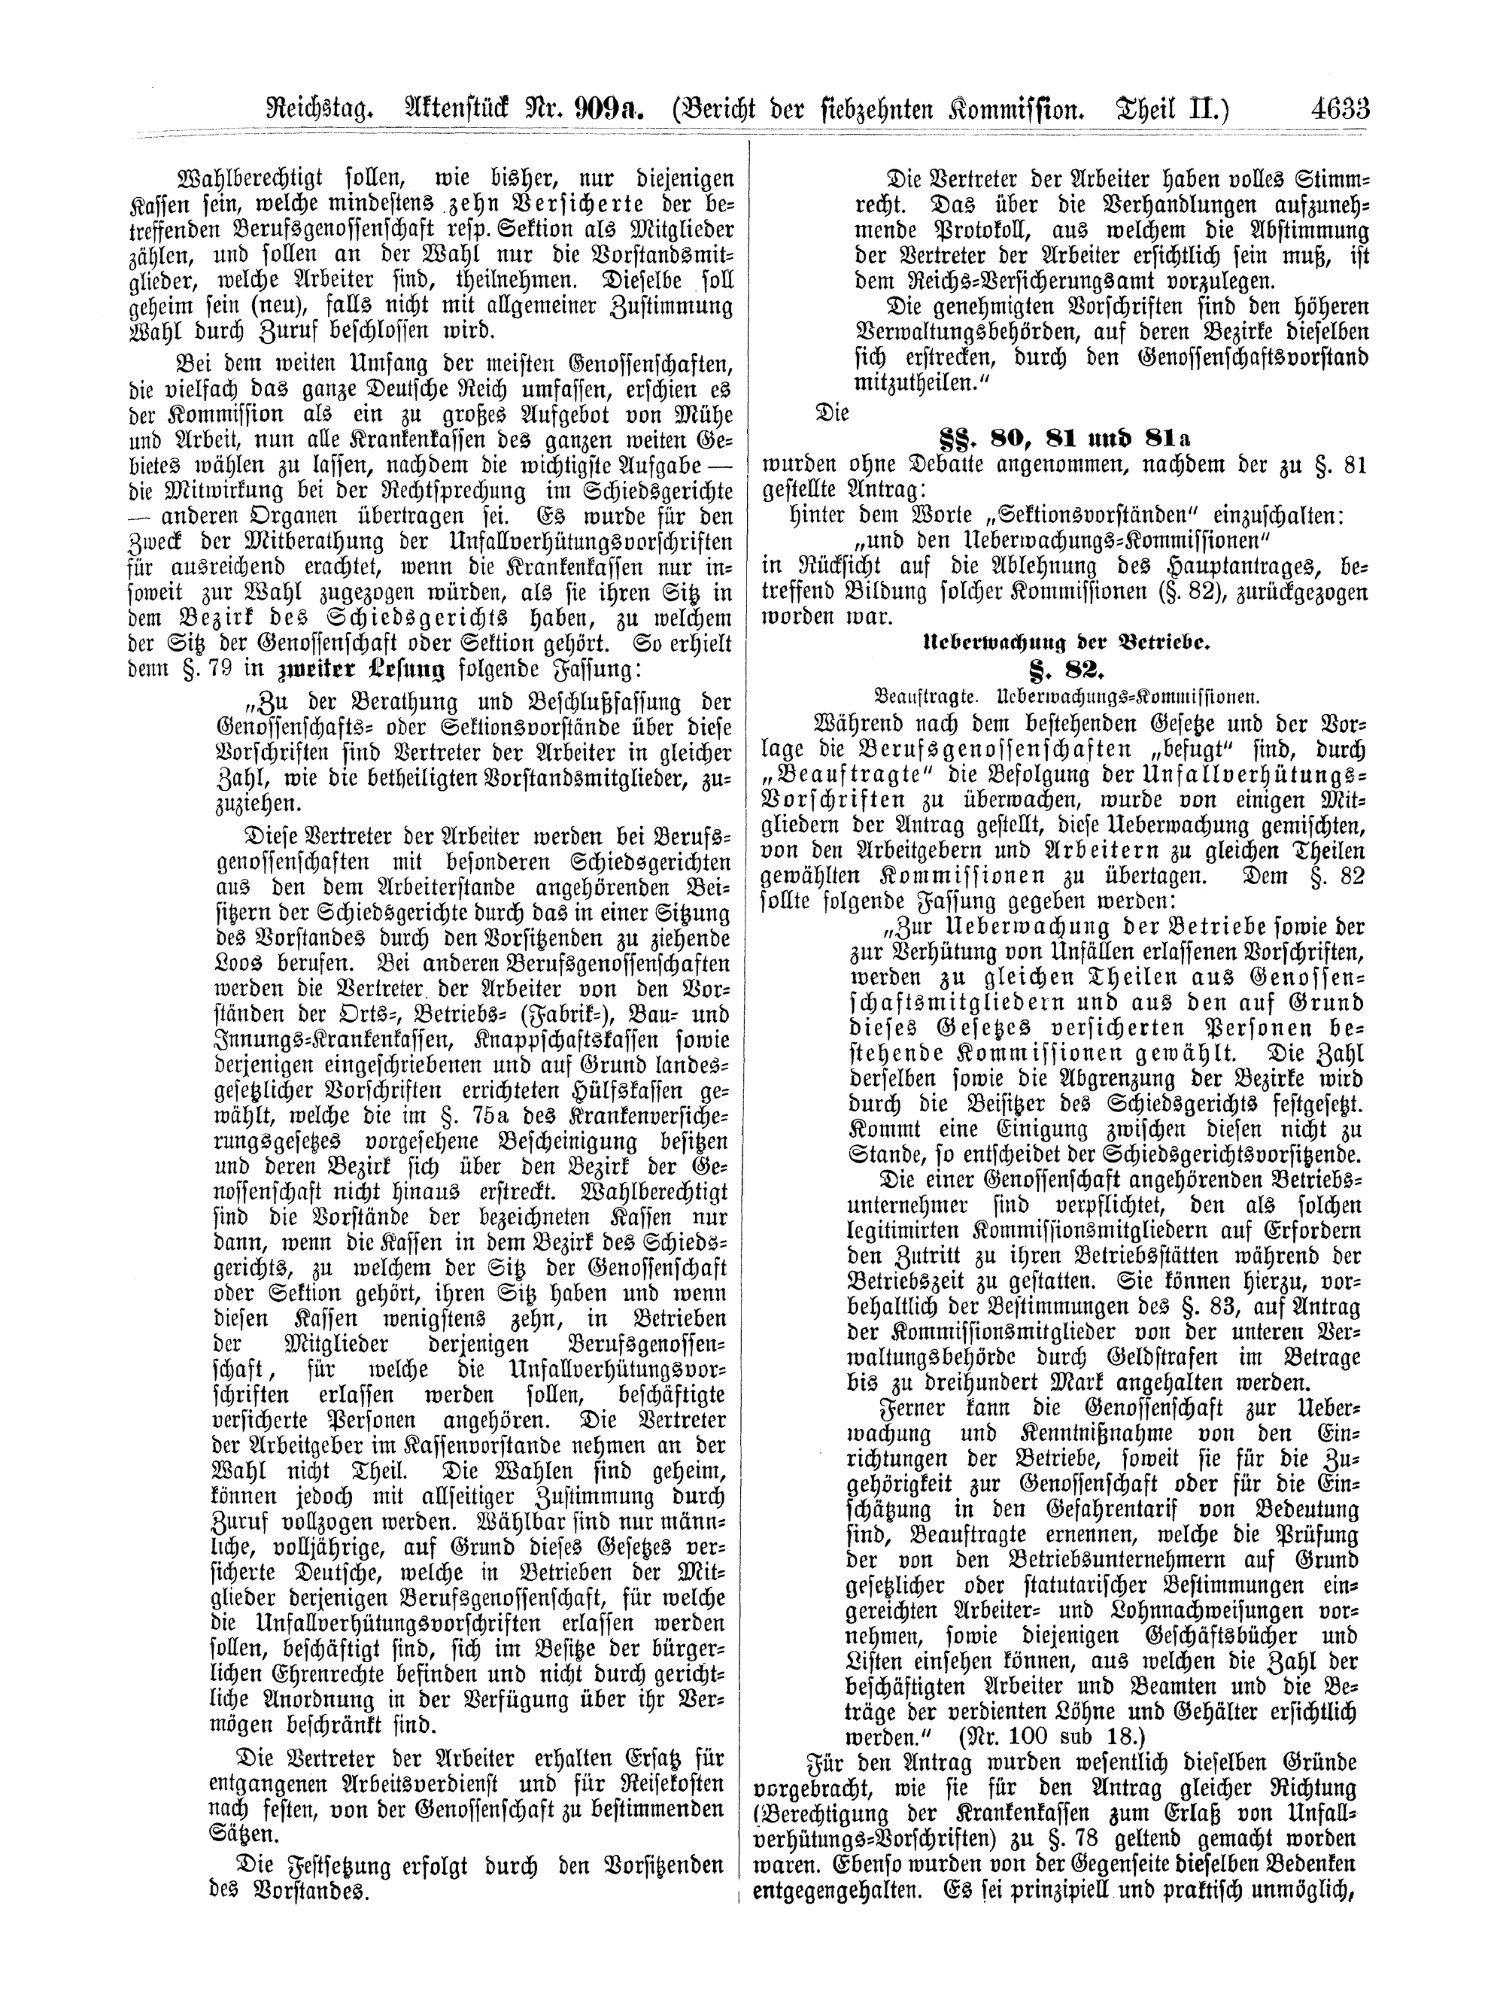 Scan of page 4633